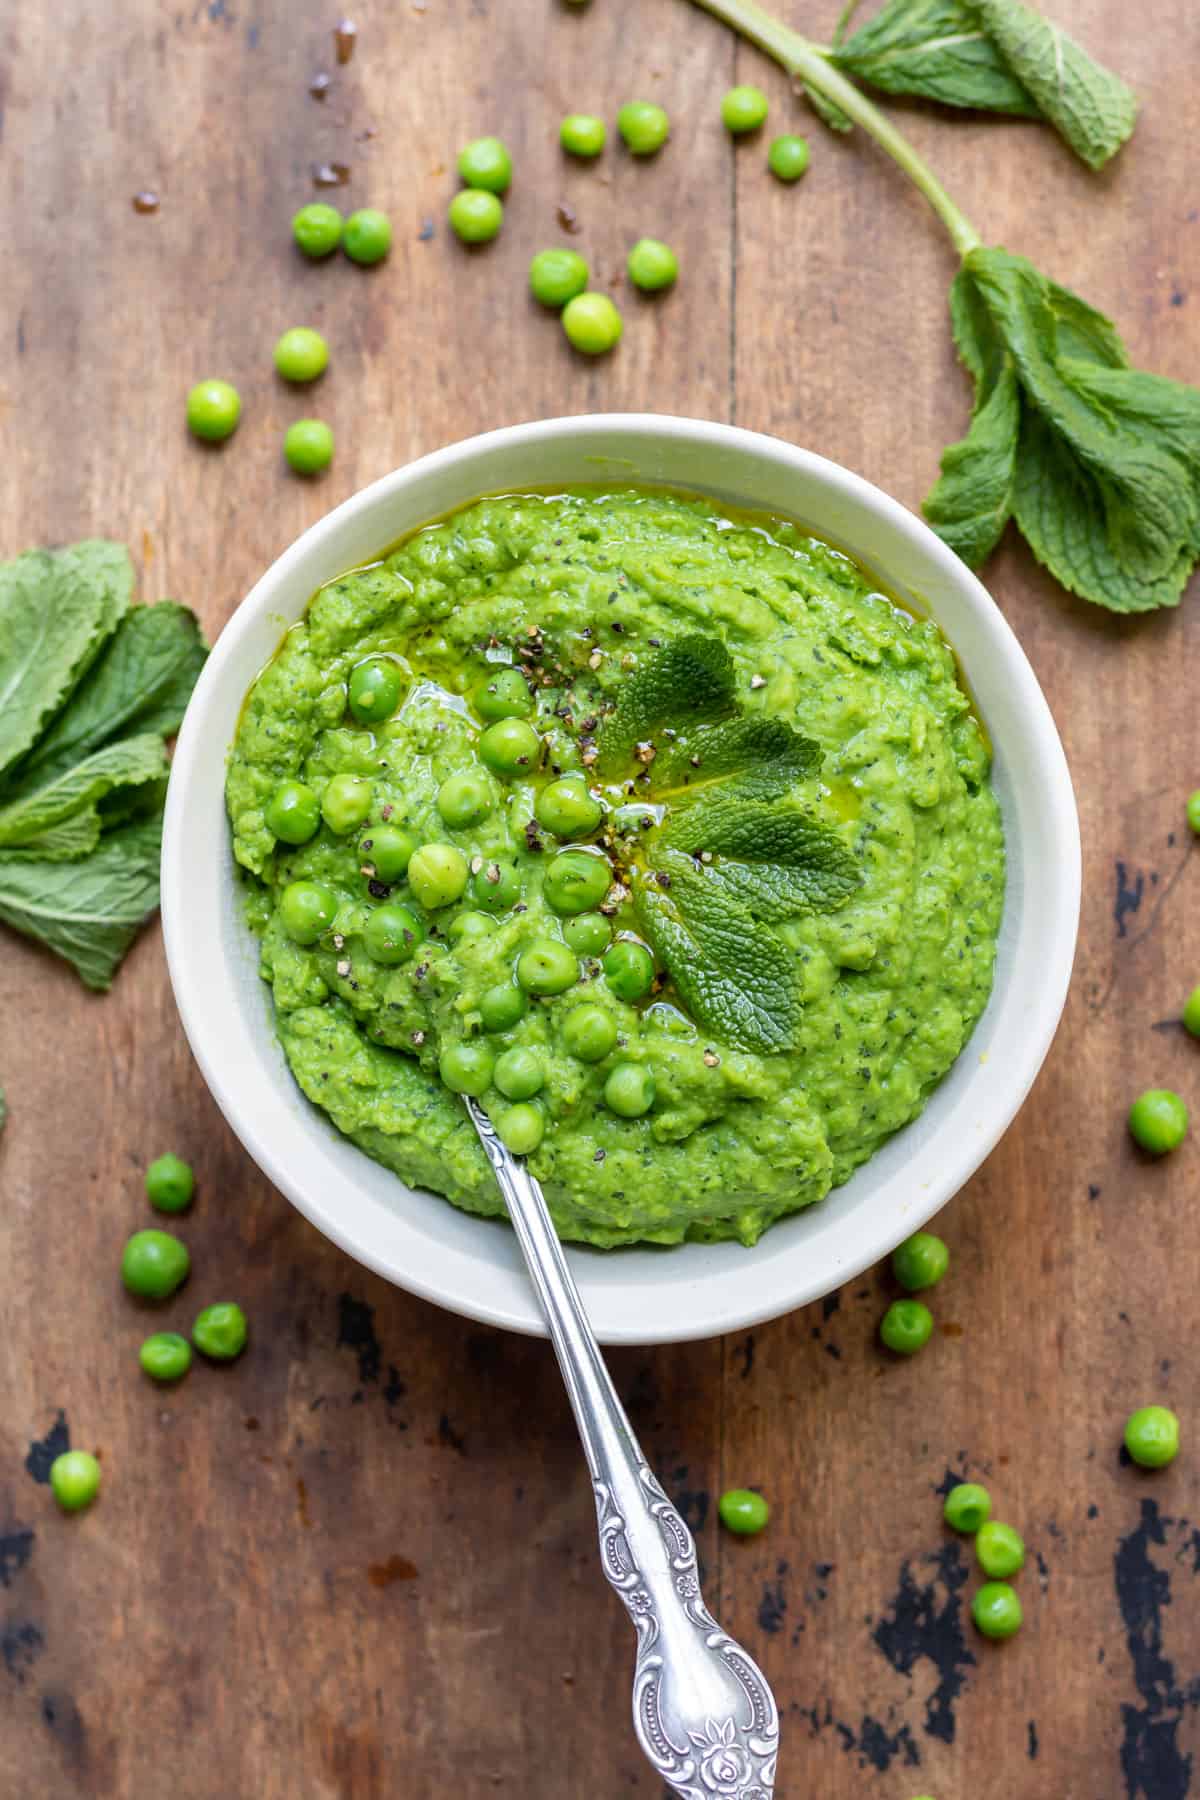 Wooden table with bowl of pureed peas, with peas and mint strewn around.